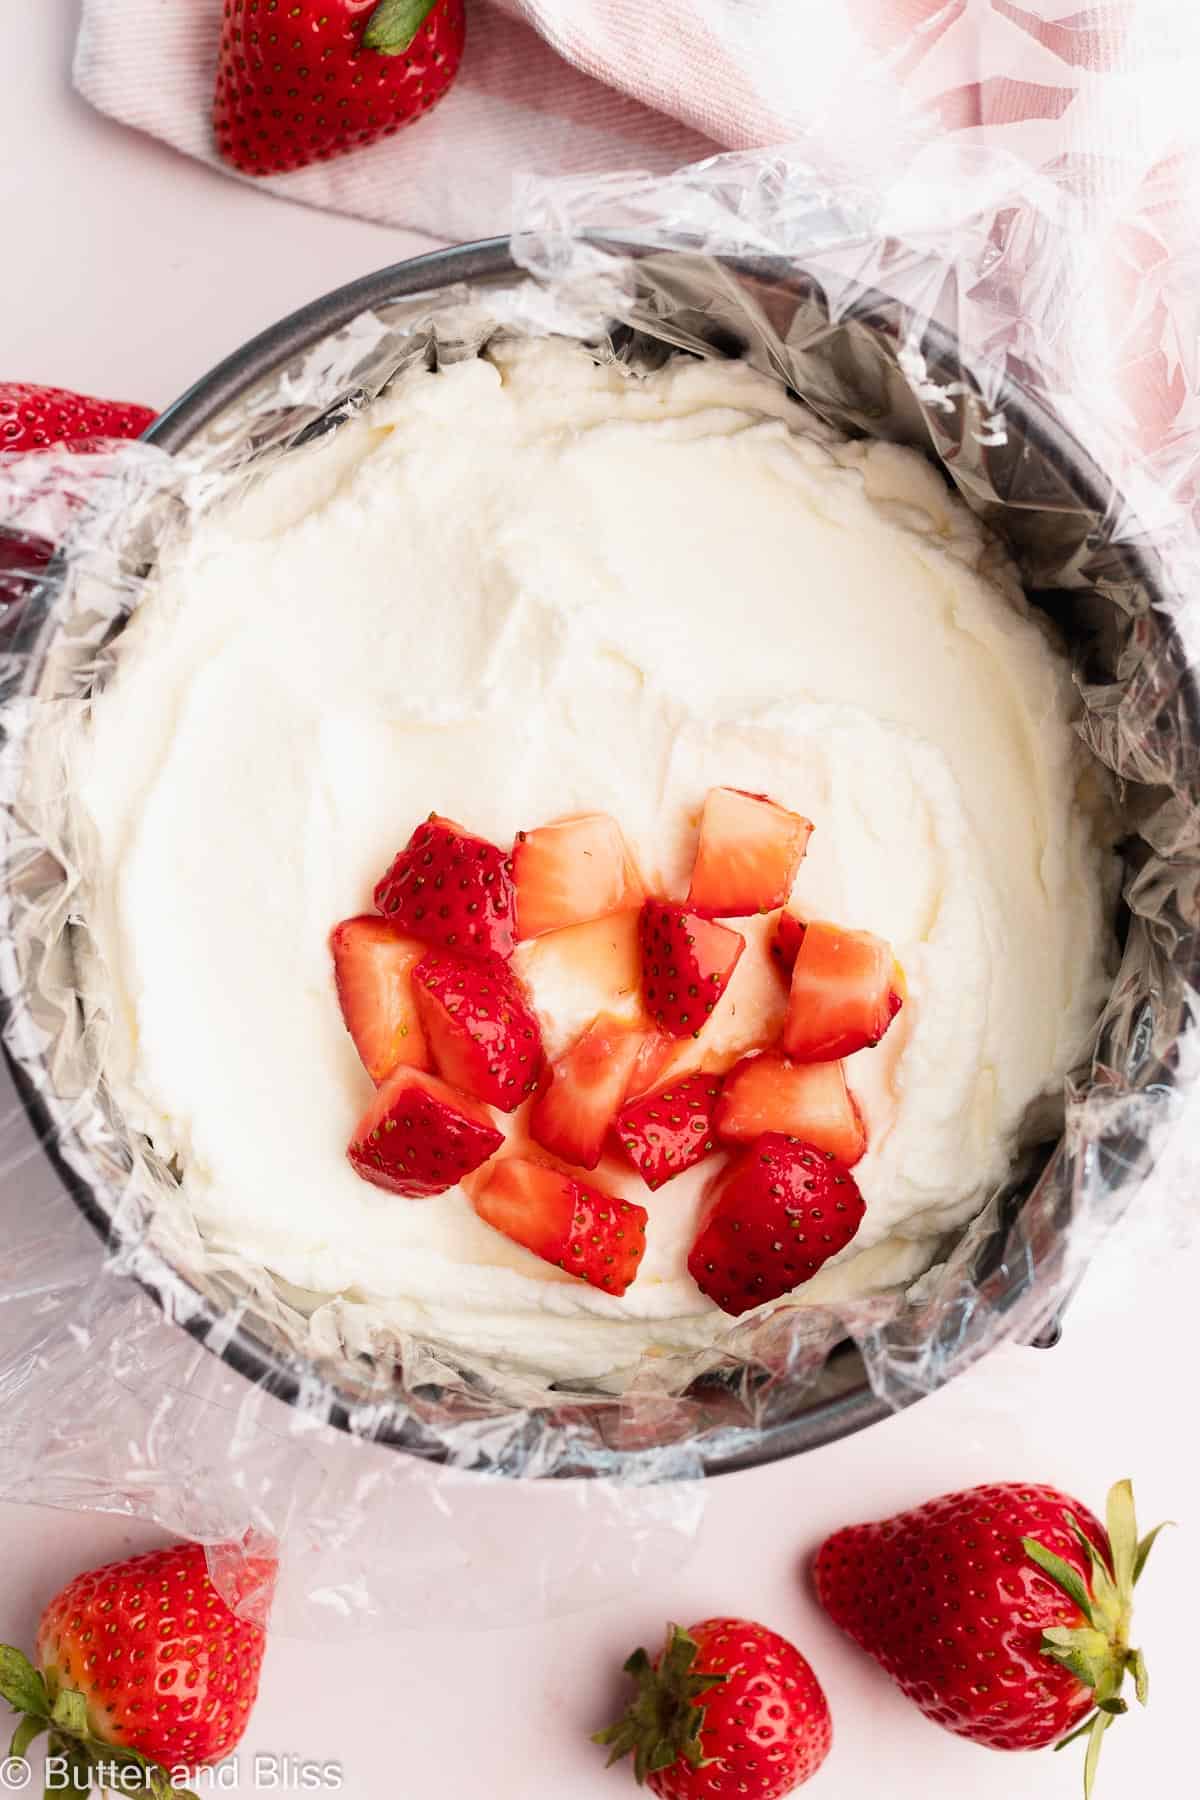 Small springform pan filled with whipped cream and a layer of chopped strawberries.